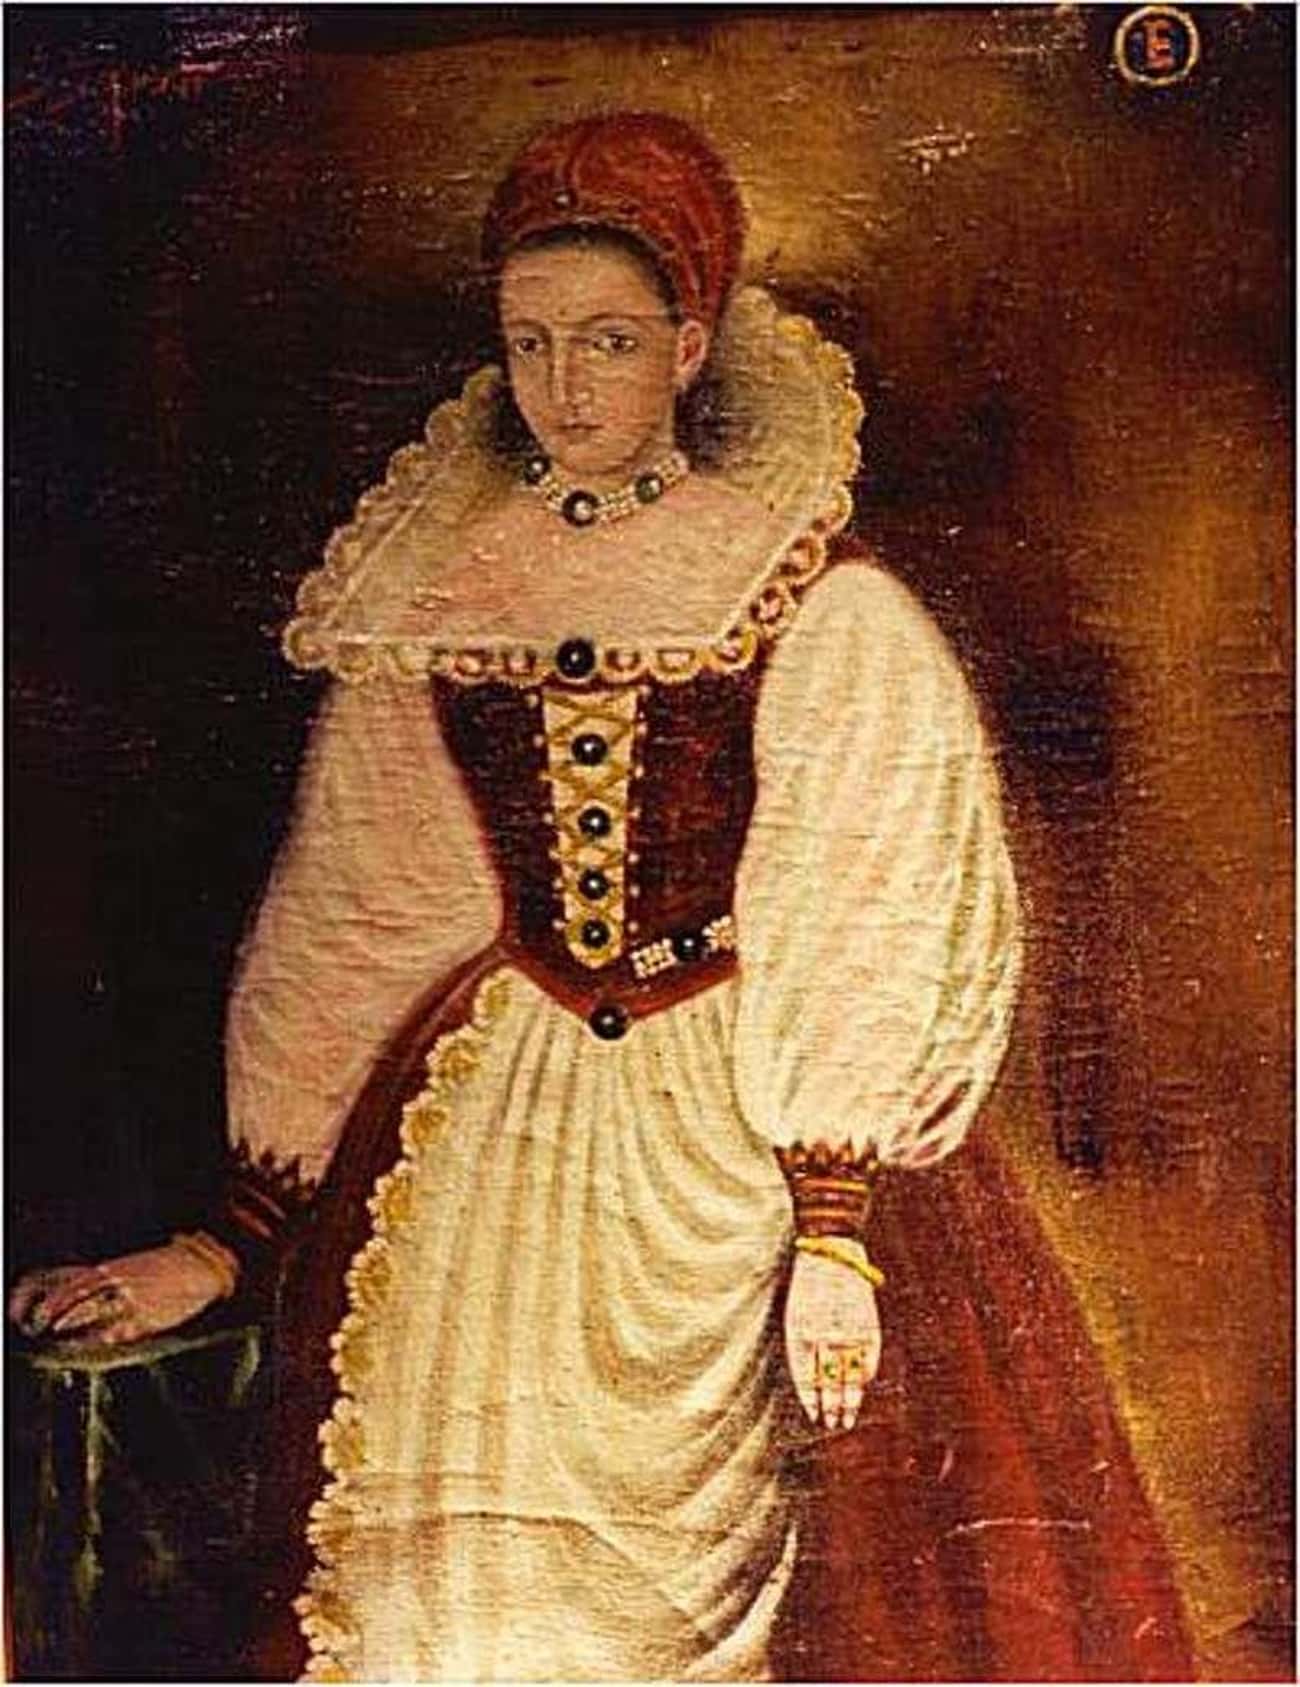 Countess Elizabeth Báthory May Have Claimed The Lives Of More Than 600 Girls